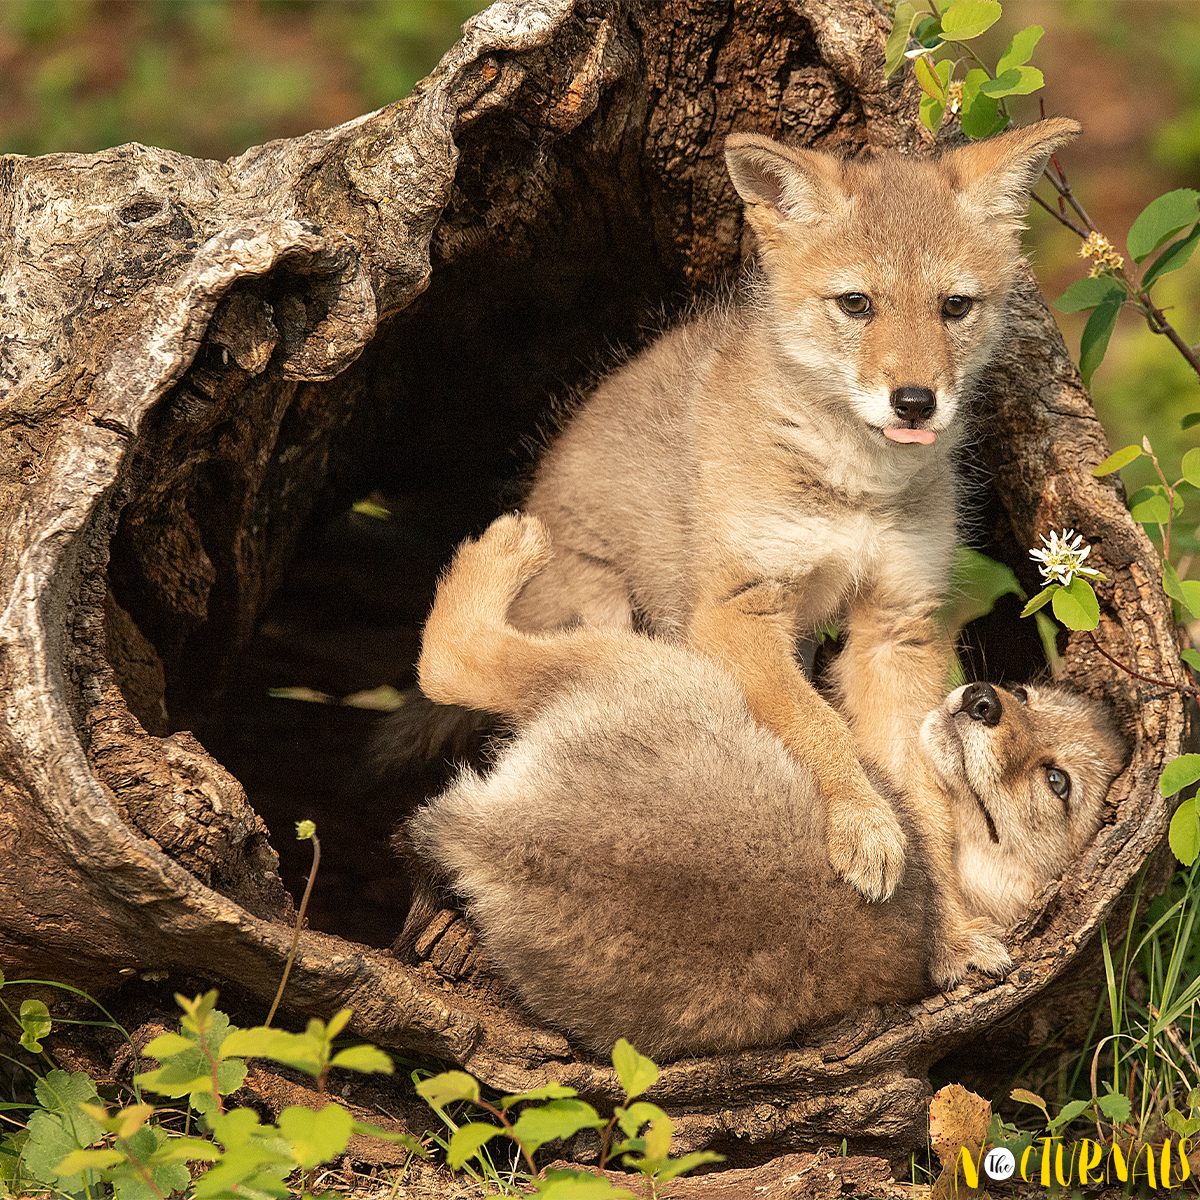 Inside a hollow tree trunk, a coyote pup is on top of another coyote pup. 